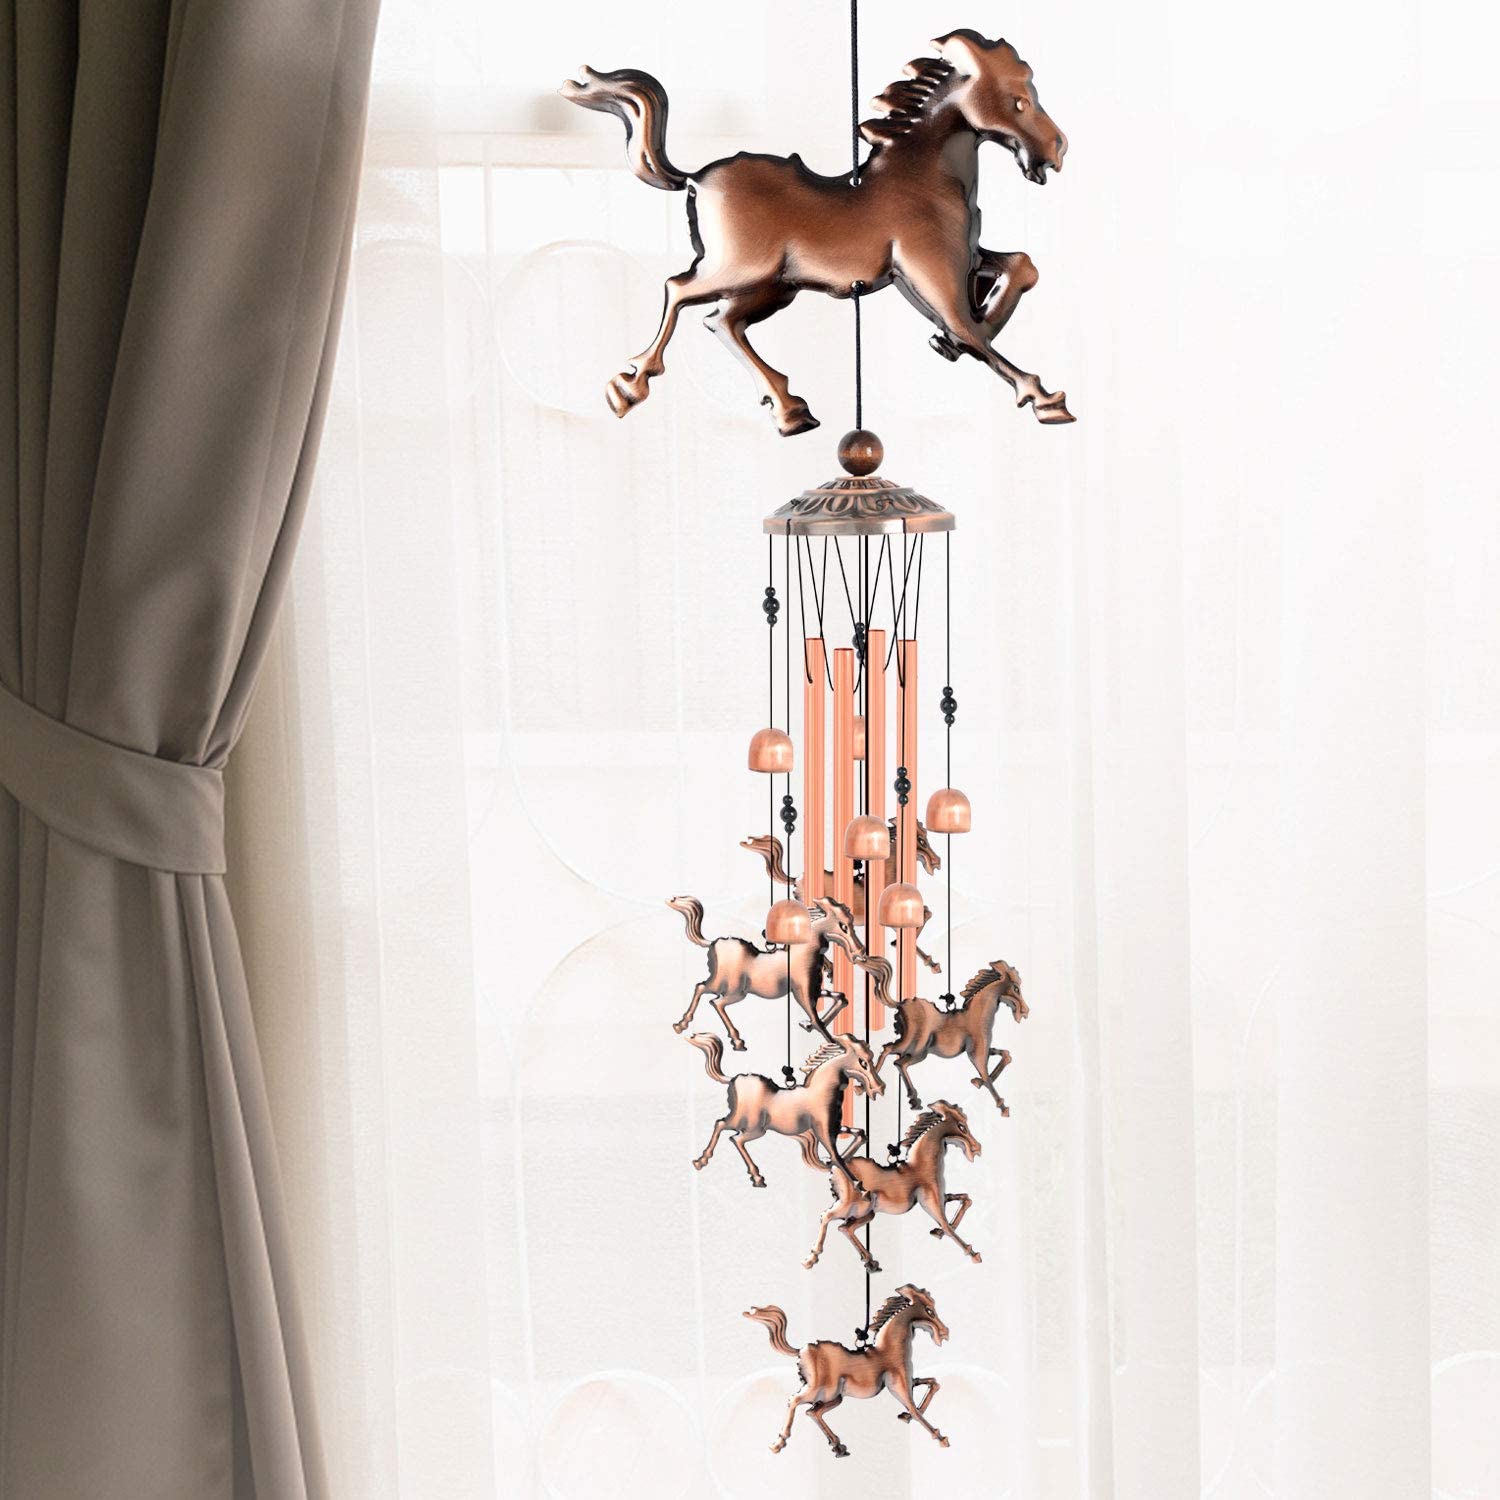 (🔥SUMMER HOT SALE - 50% OFF) Pure hand-made Copper Horse Wind Chimes - BUY 2 FREE SHIPPING